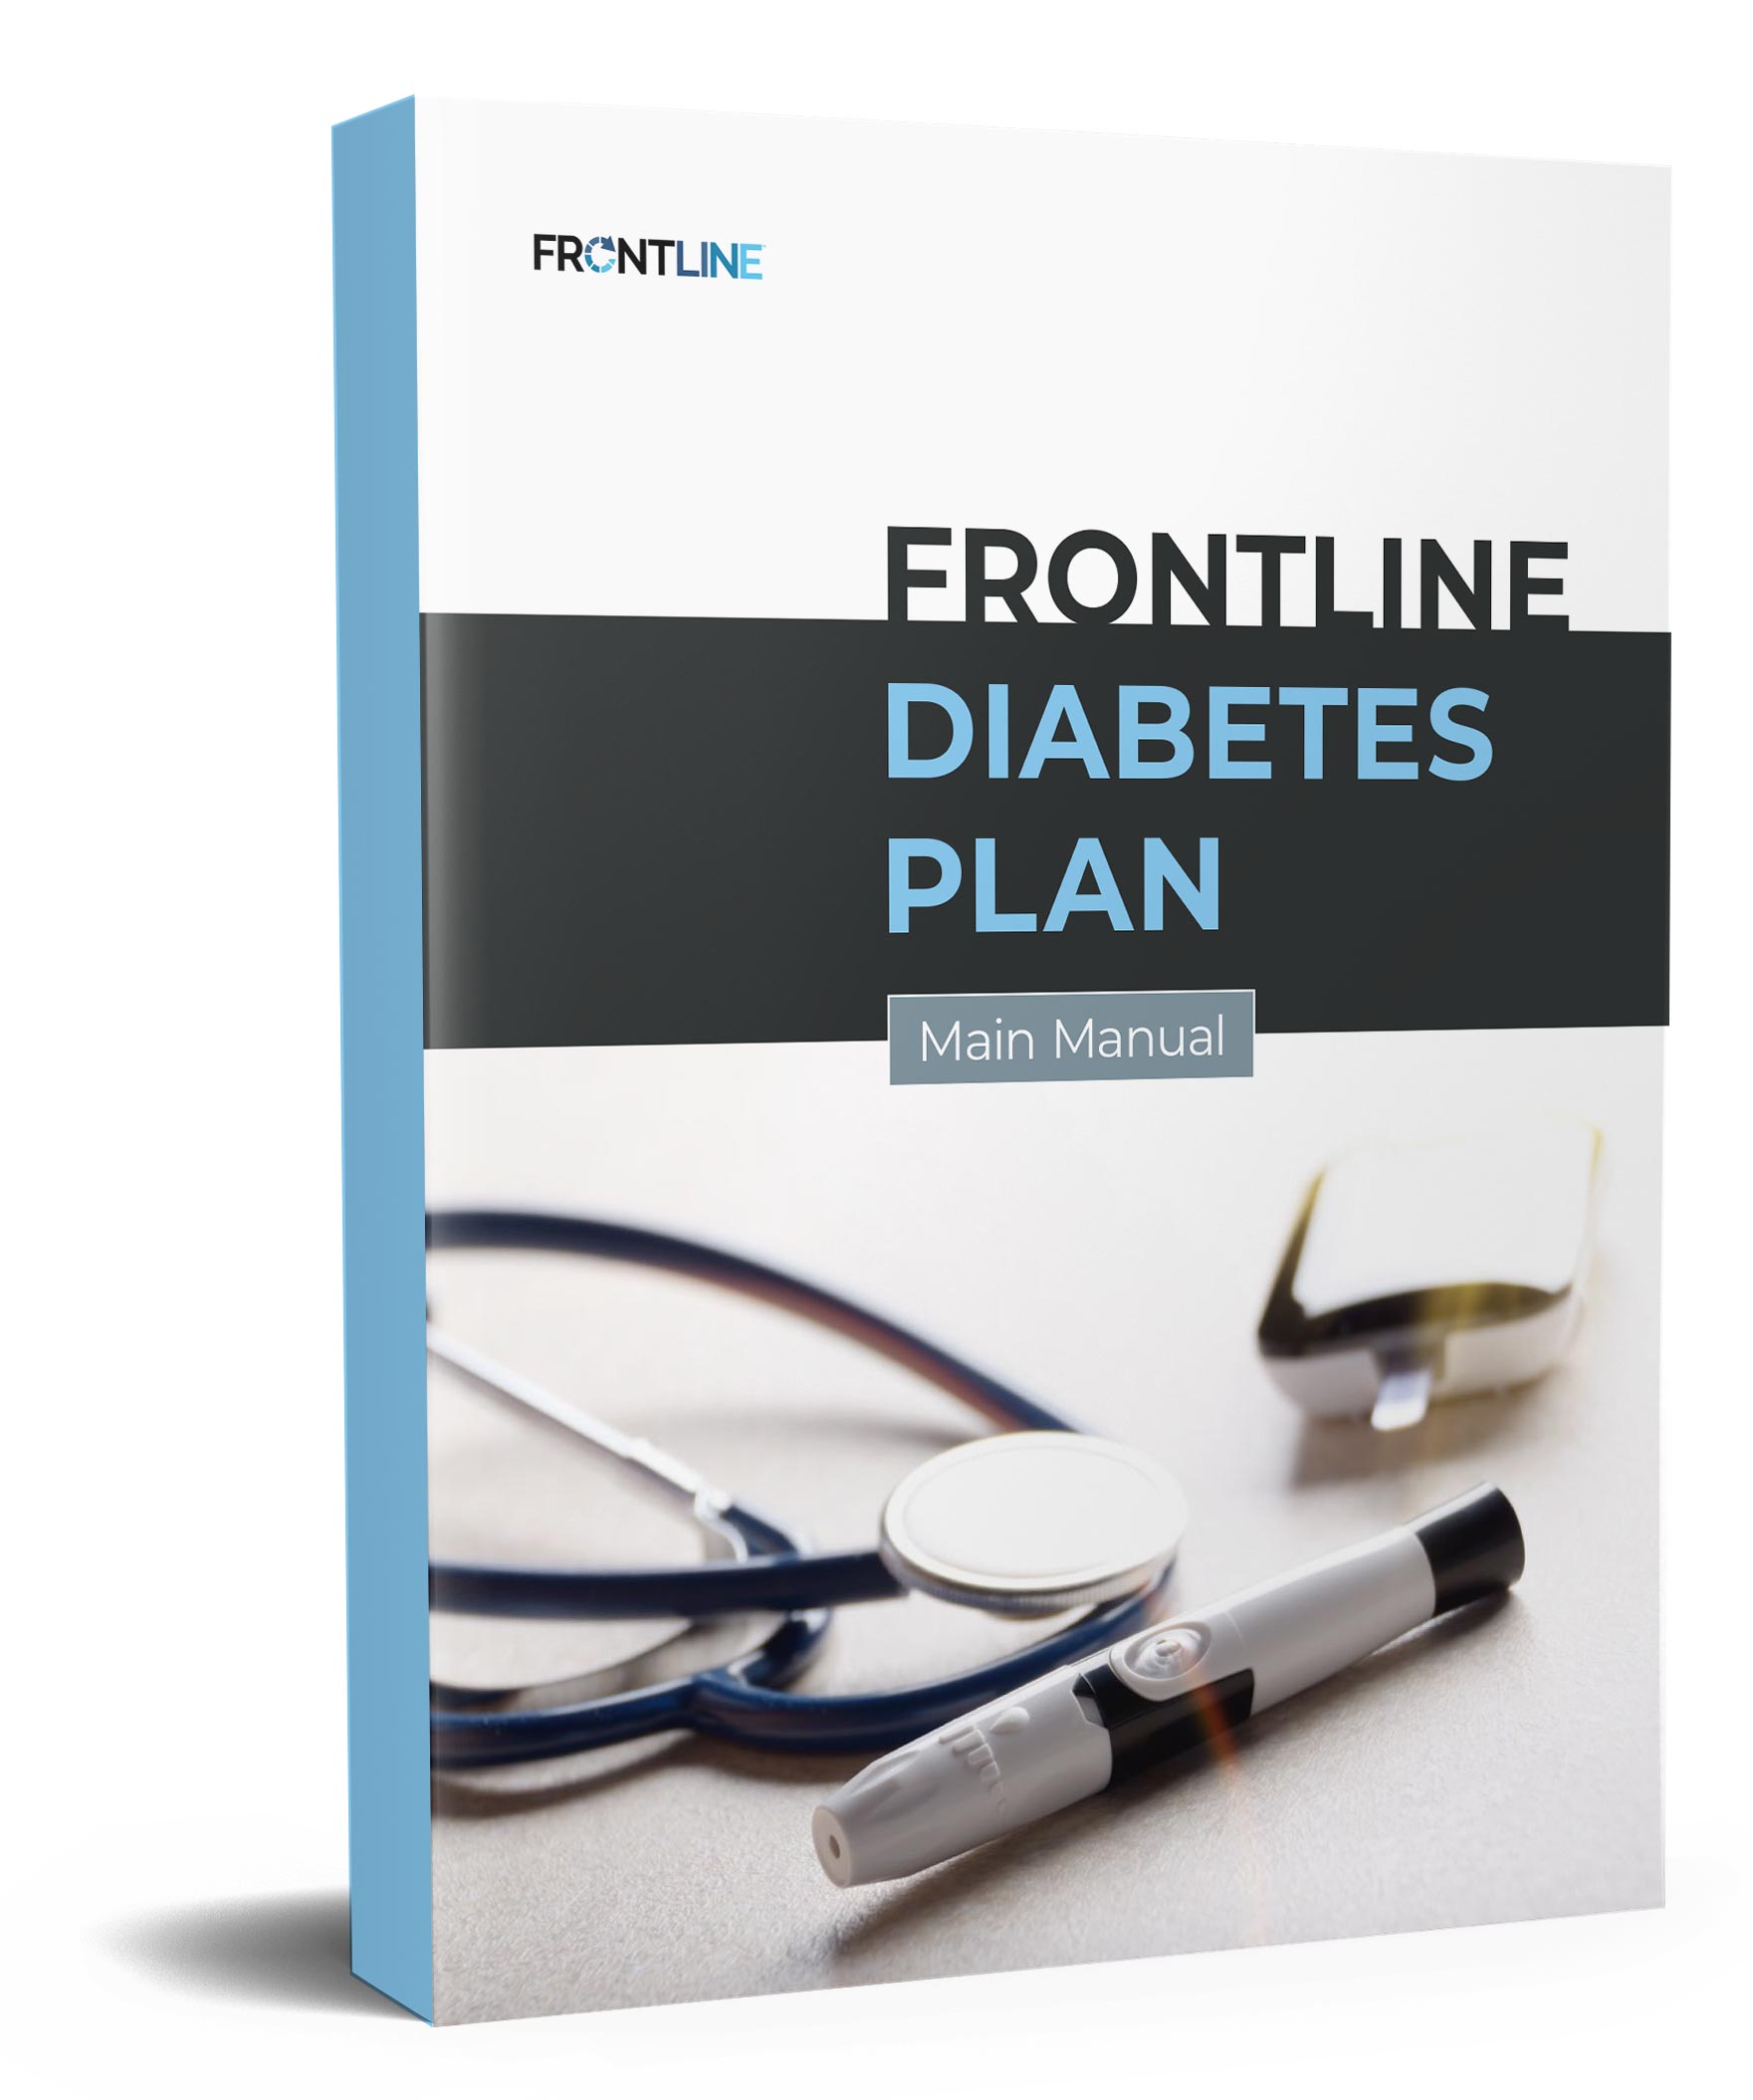 Cyber Monday FRONTLINE Diabetes Buy 4 Get 1 + eBooks (Save Over $115)